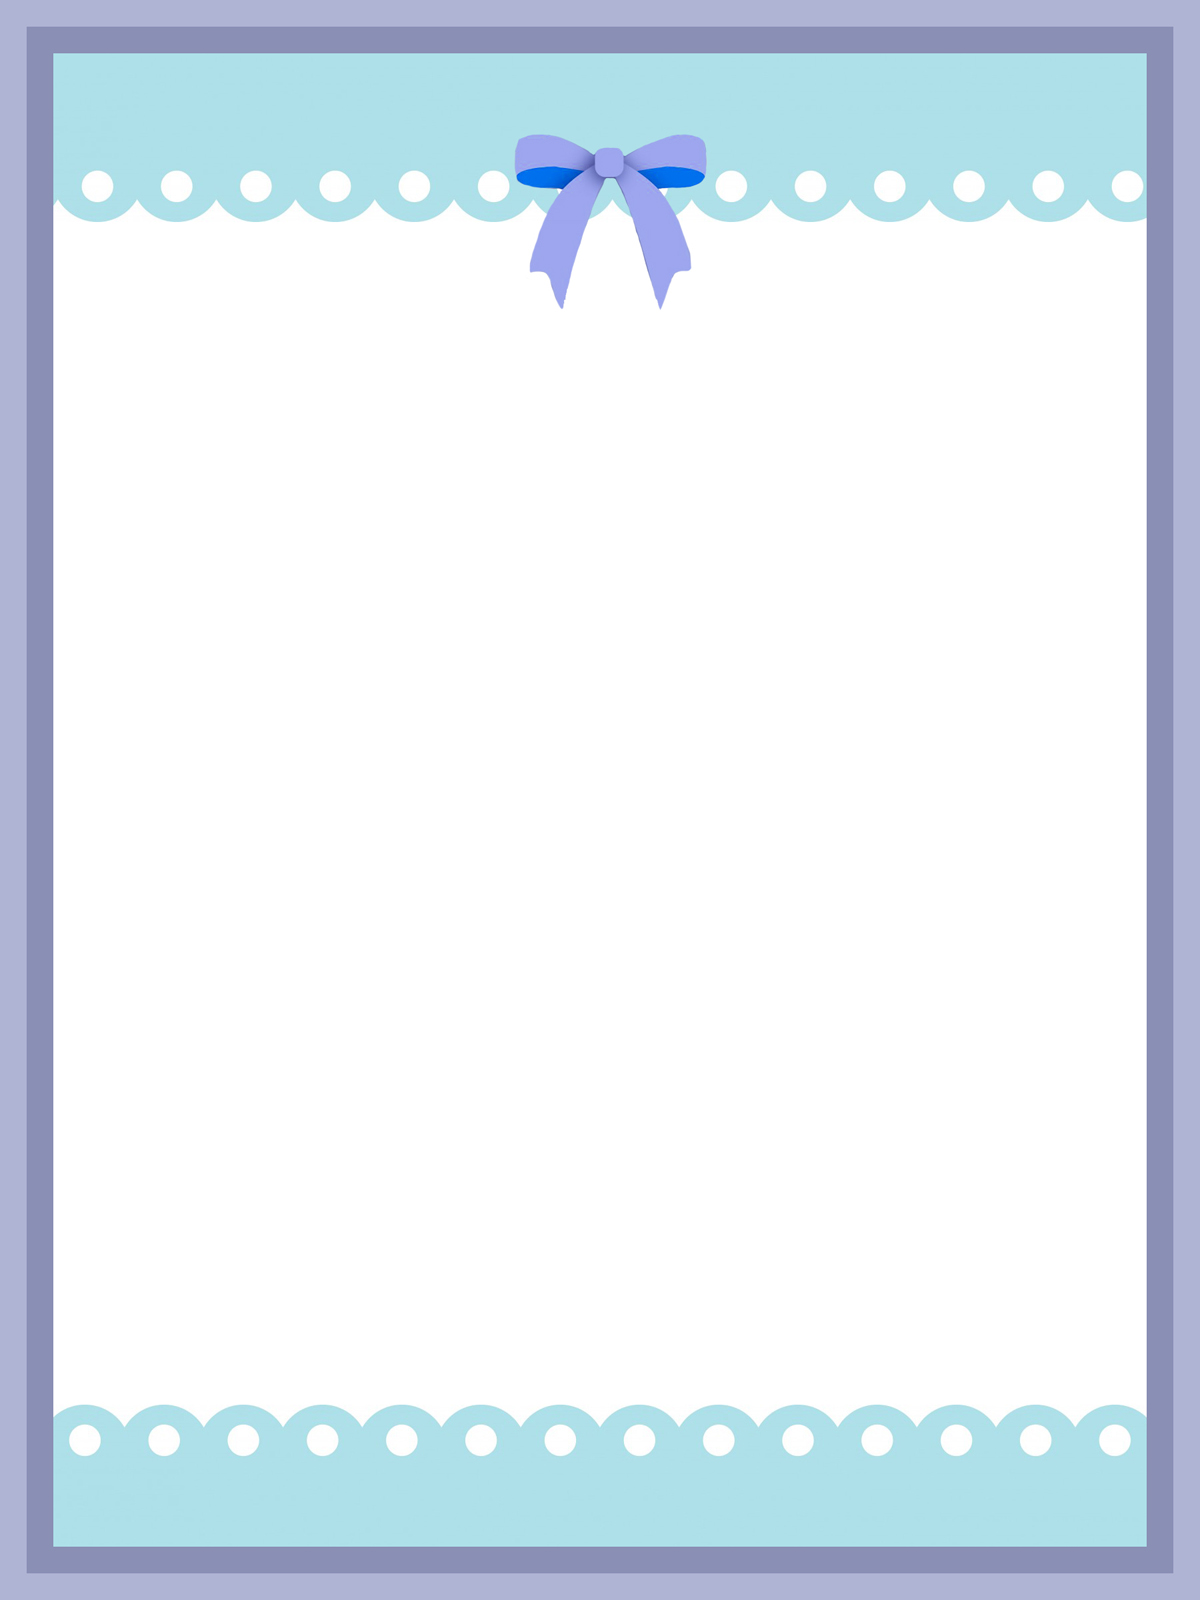 free baby clipart borders and frames - photo #21